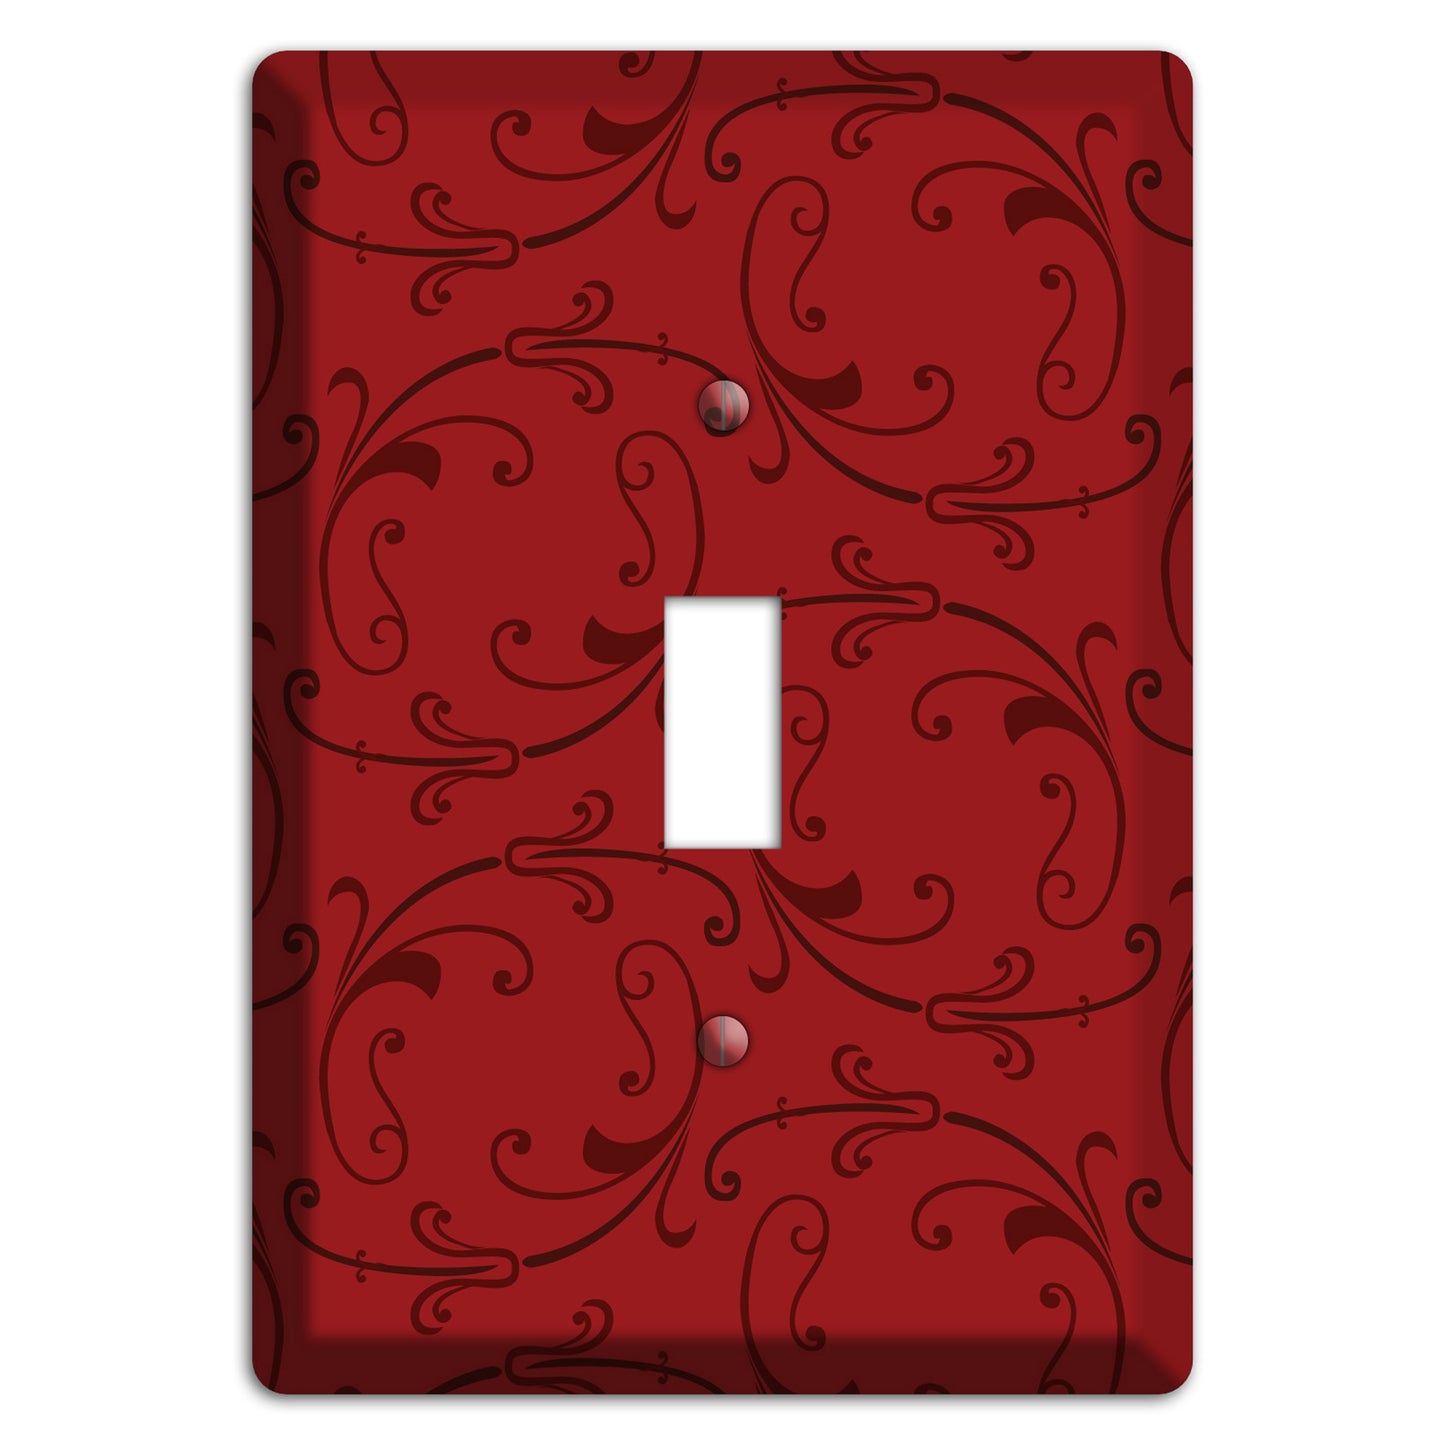 Red Victorian Sprig Cover Plates